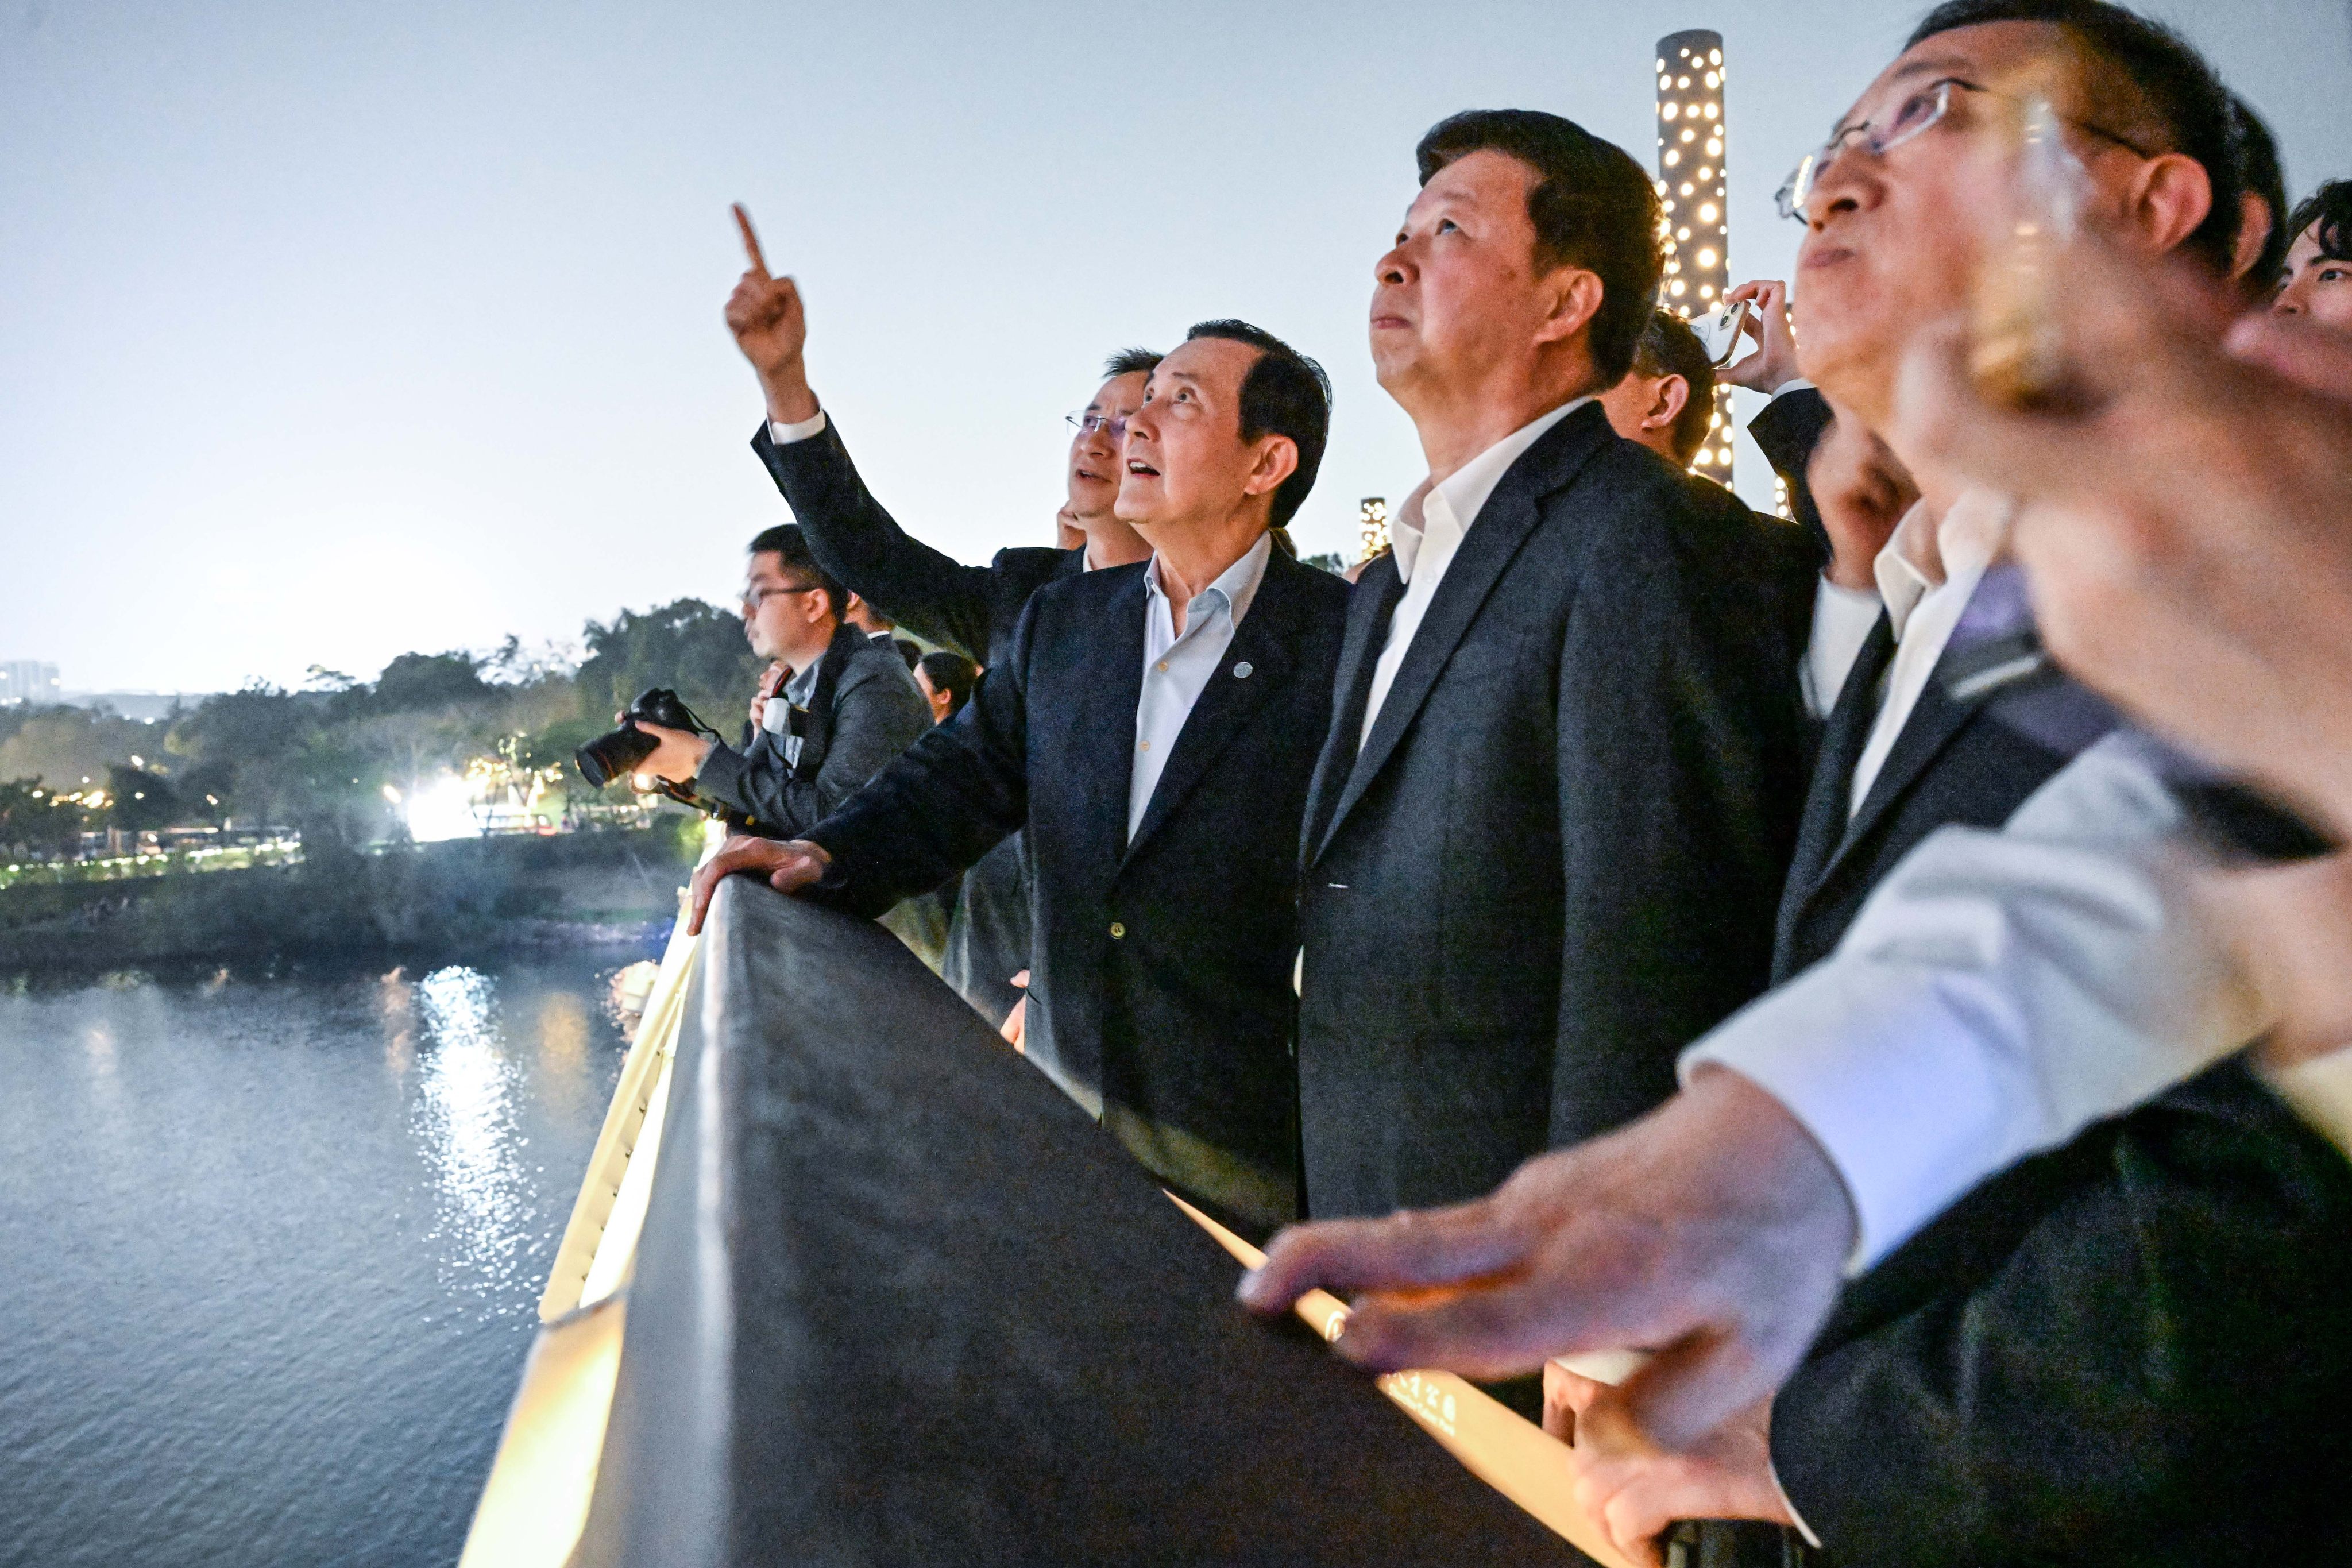 Members of a delegation from Taiwan led by Ma Ying-jeou watch a drone show at Shenzhen Talent Park on April 1. Photo: Xinhua 